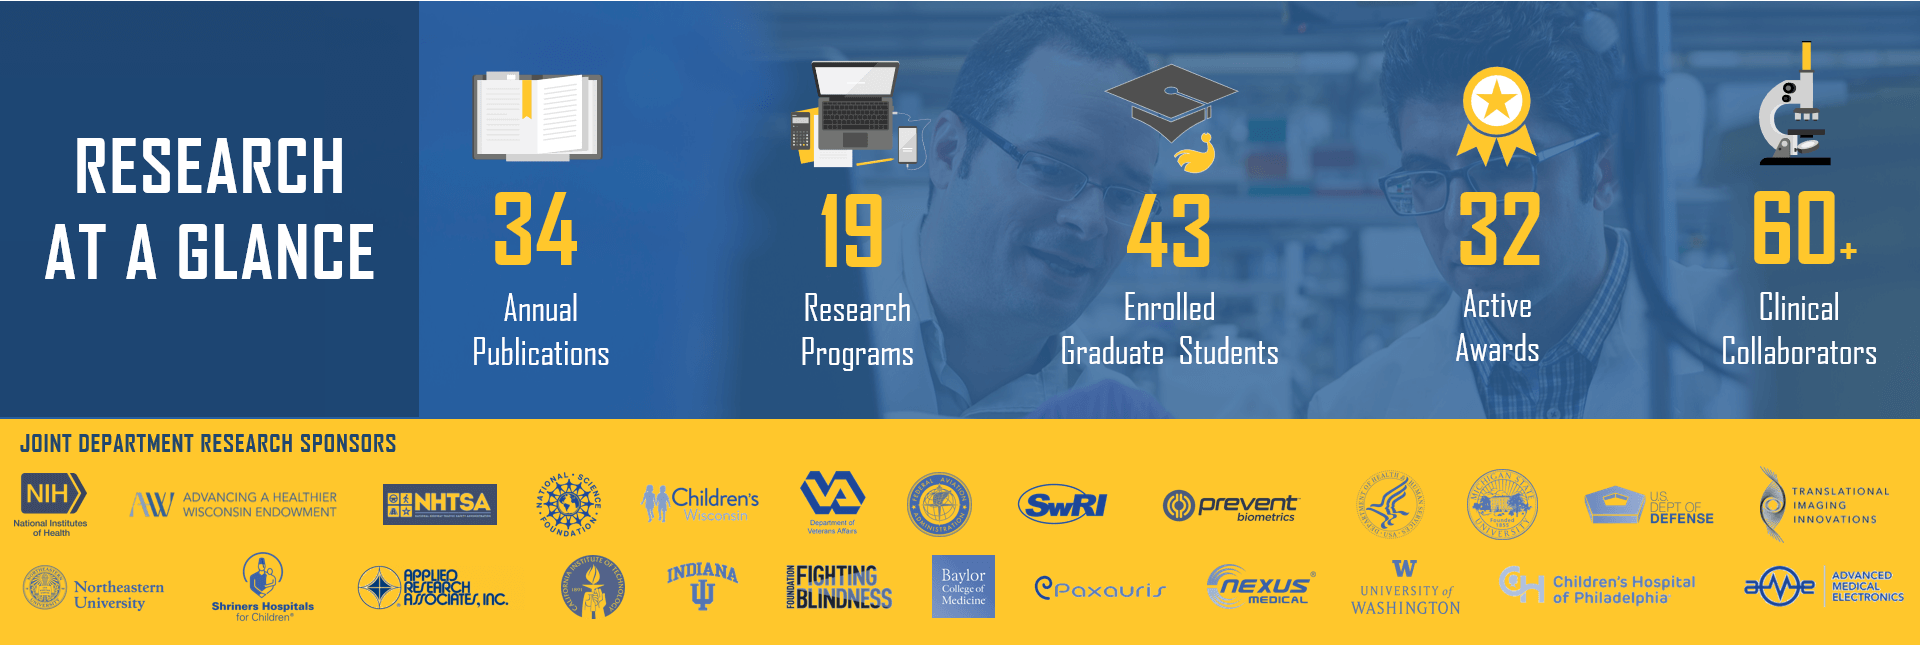 Prototype partner logos https://mcw.marquette.edu/biomedical-engineering/research.php#researchGlance